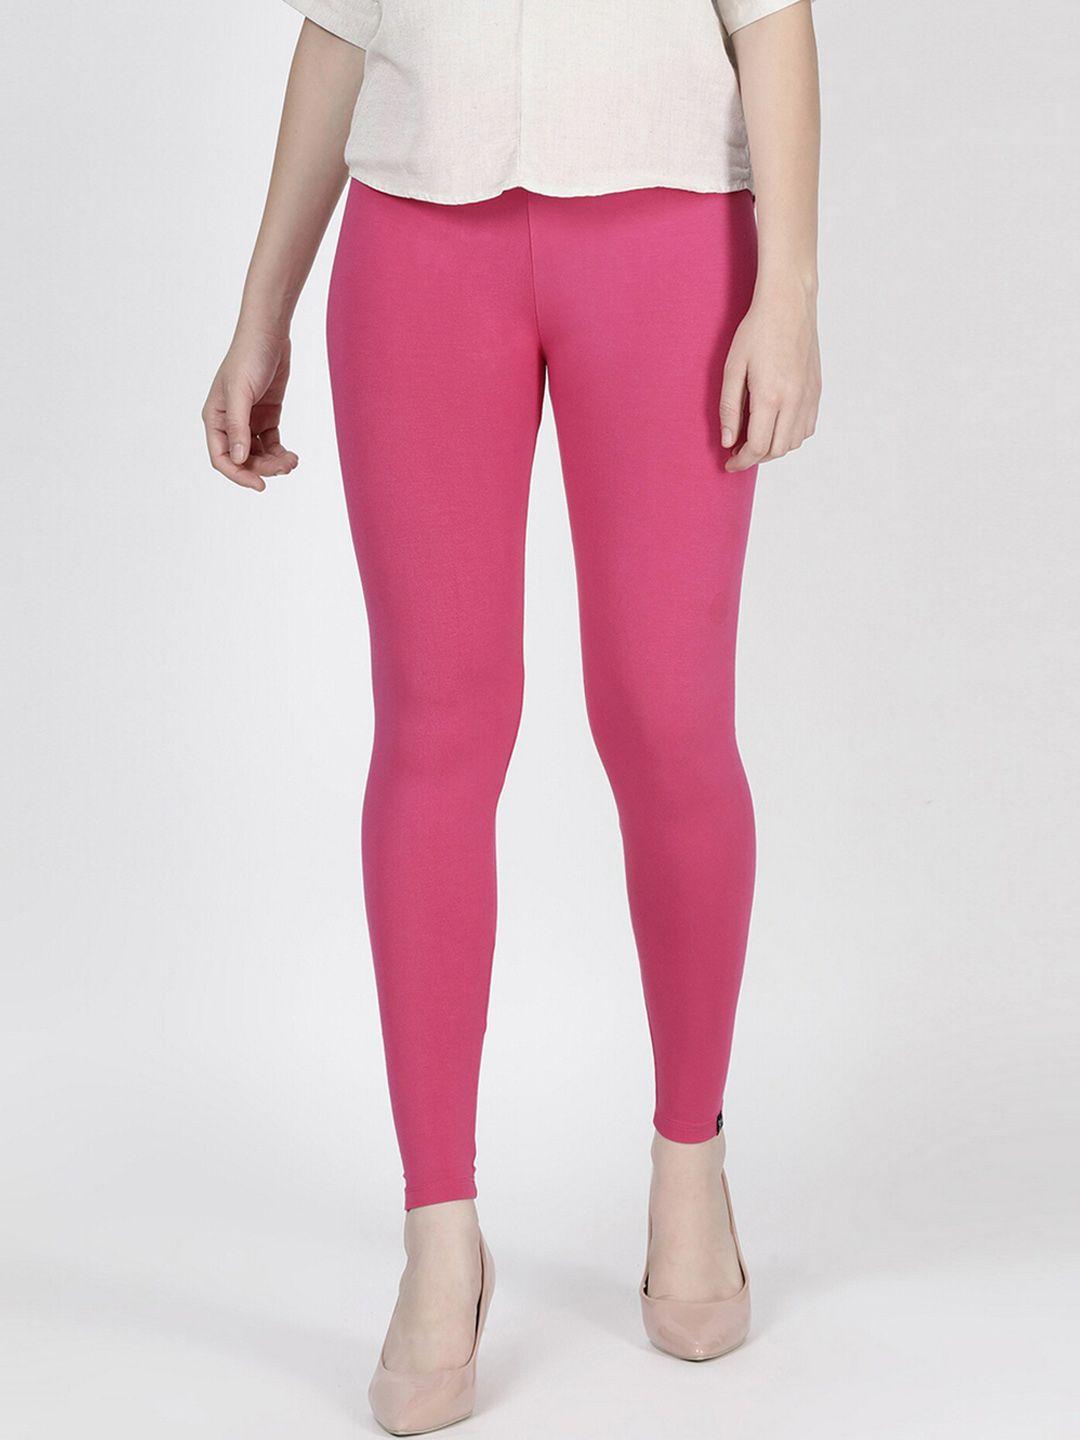 twin birds women pink solid ankle-length legging